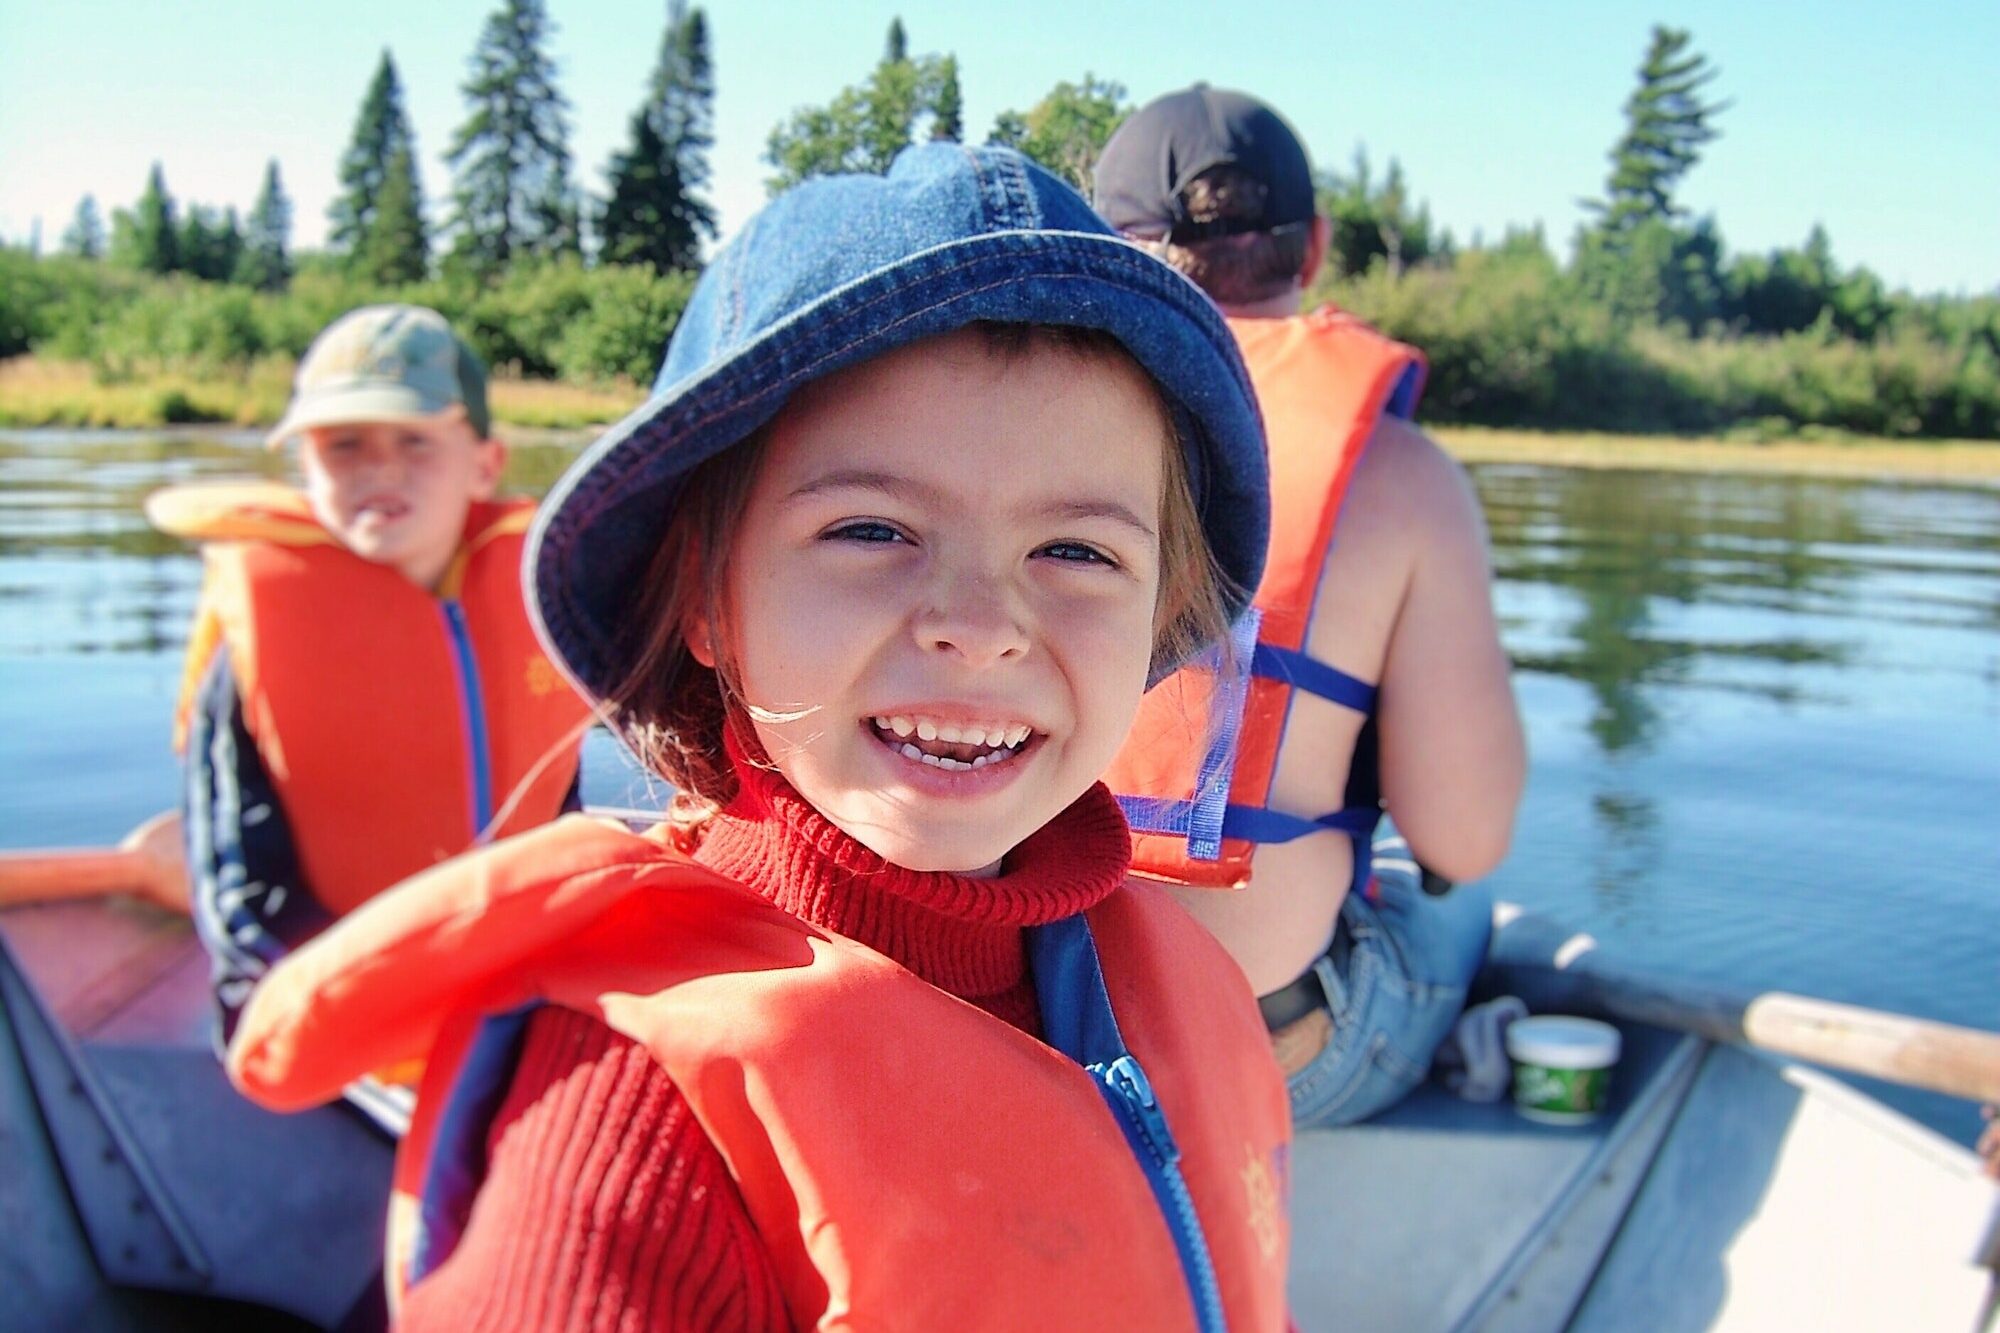 Portrait of little girl smiling while with family on a boat on lake fishing